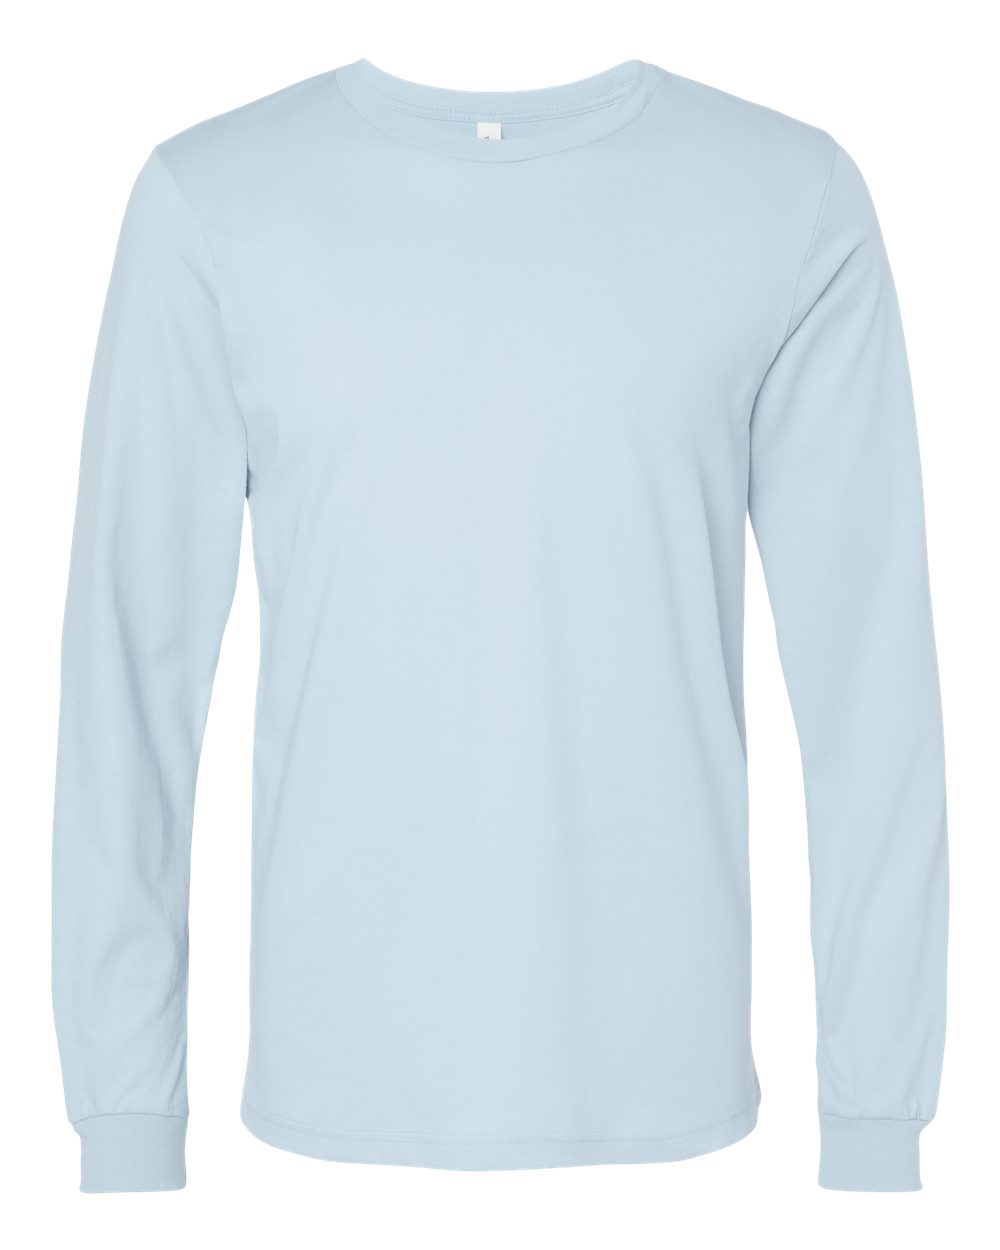 Bella + Canvas Long Sleeve (3501) in Baby Blue